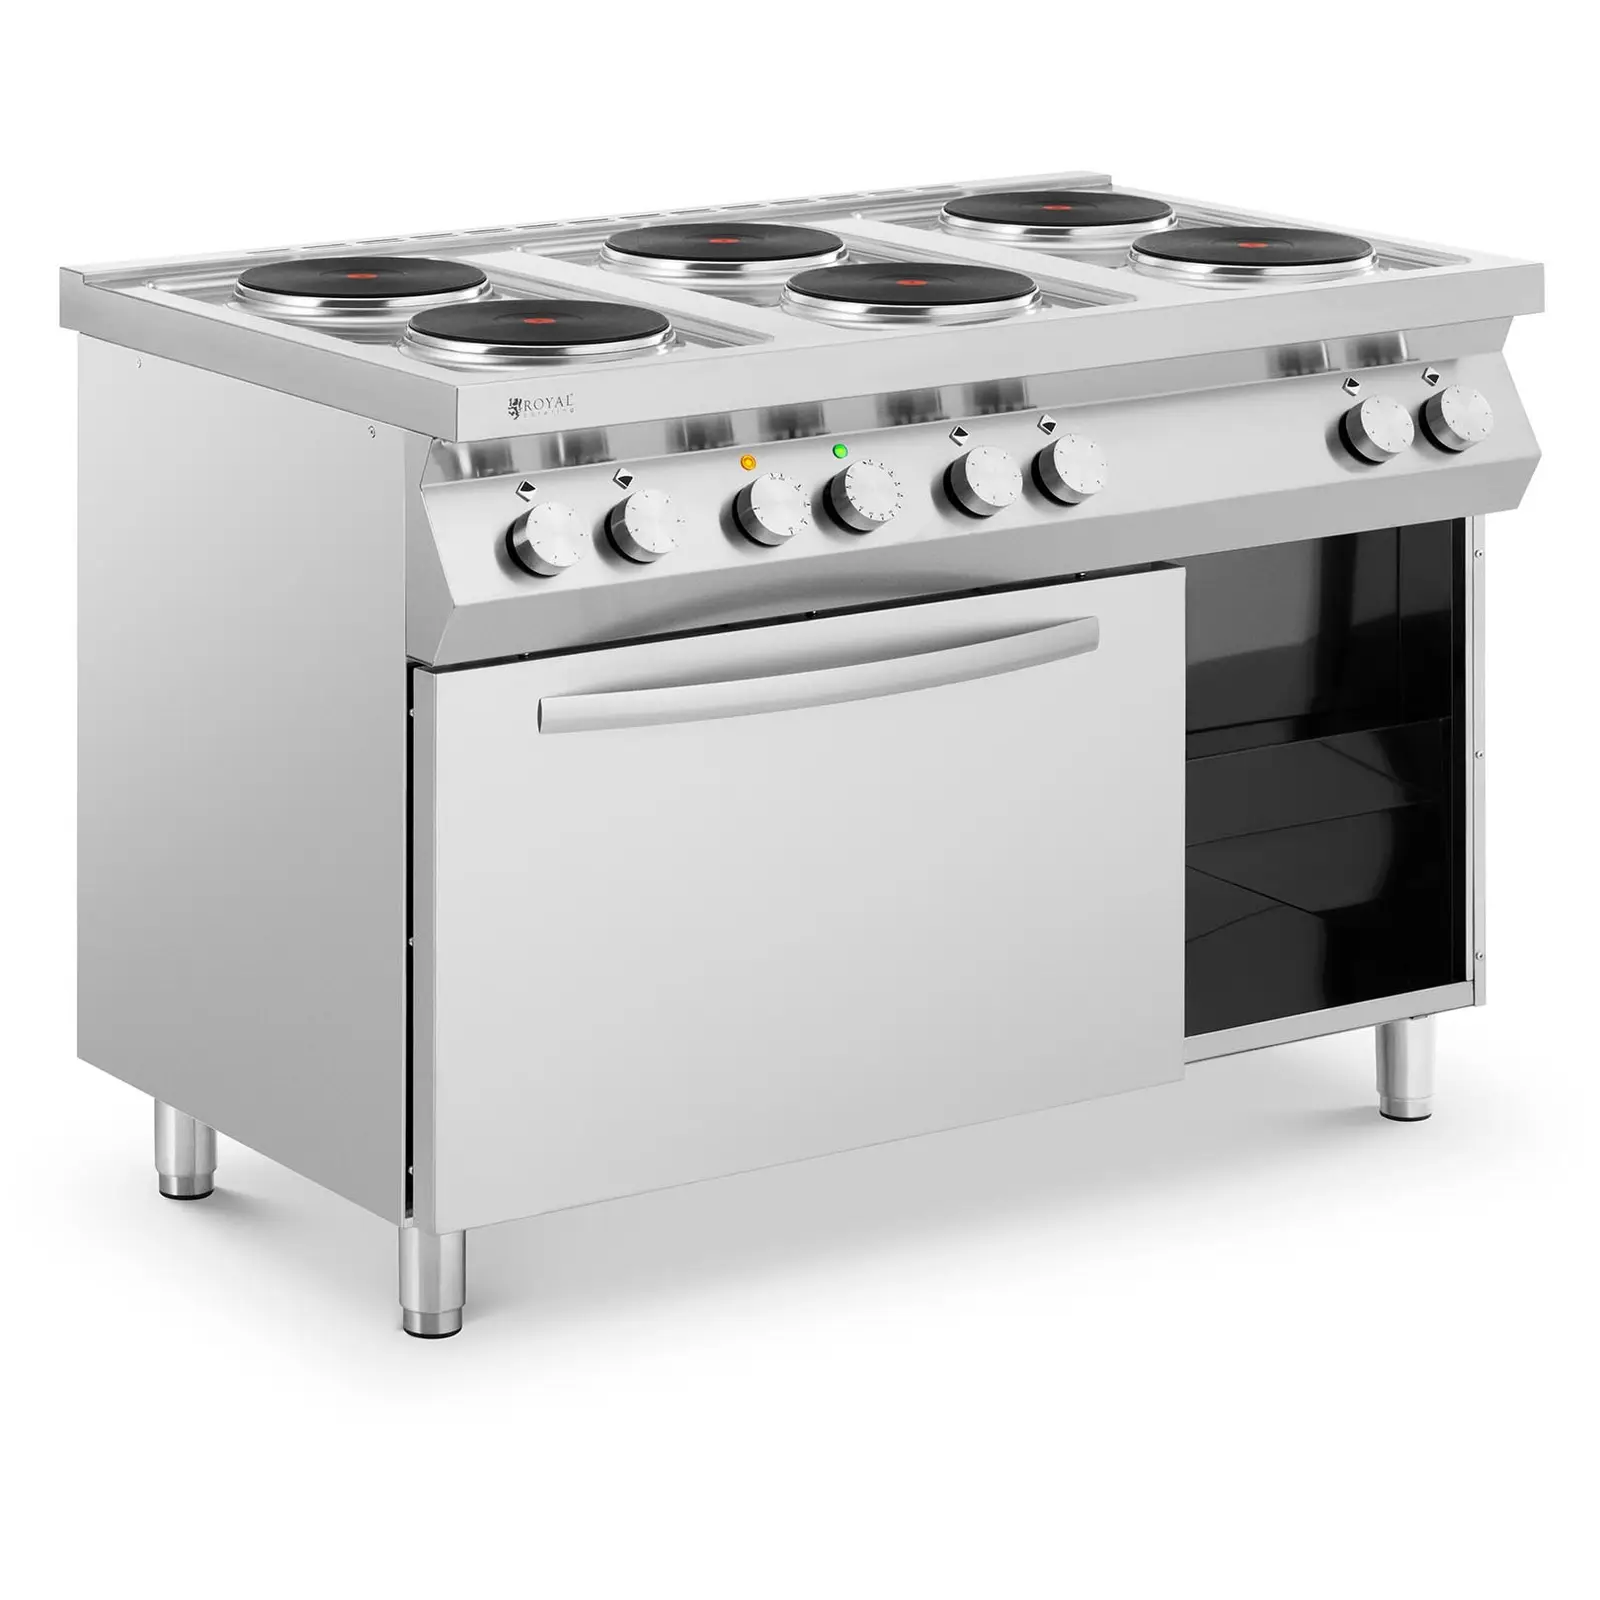 Electric Cooker - 15600 W - 6 plates - with convection oven - base cabinet - Royal Catering